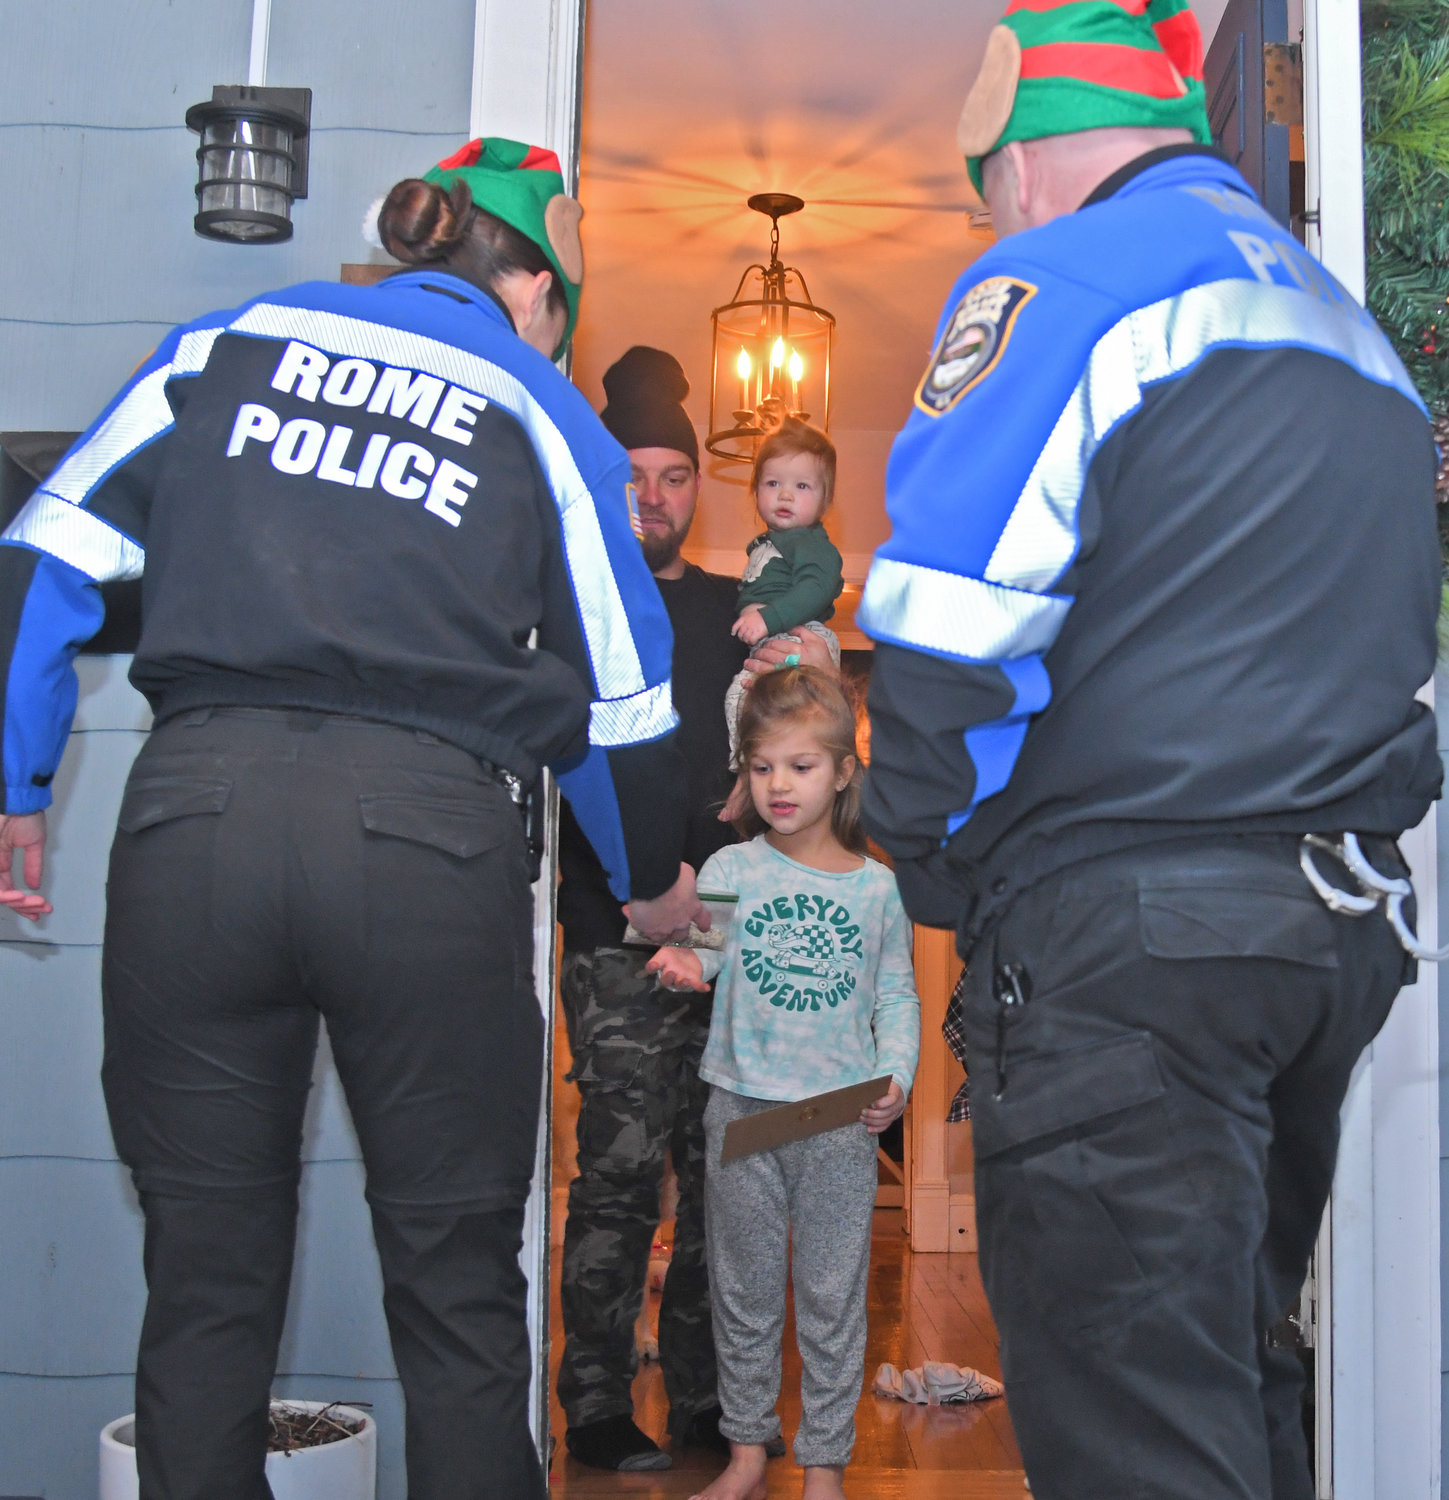 Rome Police officers Jenna Kiskiel and Anthony Calandra deliver a letter from the North Pole and some reindeer food to 5-year-old Teagan Thomson in Rome on Tuesday. With Thomson is her father, Jeremy Thomson. Teagan was one of dozens of children who dropped off their letters to Santa in the special mailbox the Rome Police set up at the station this year.